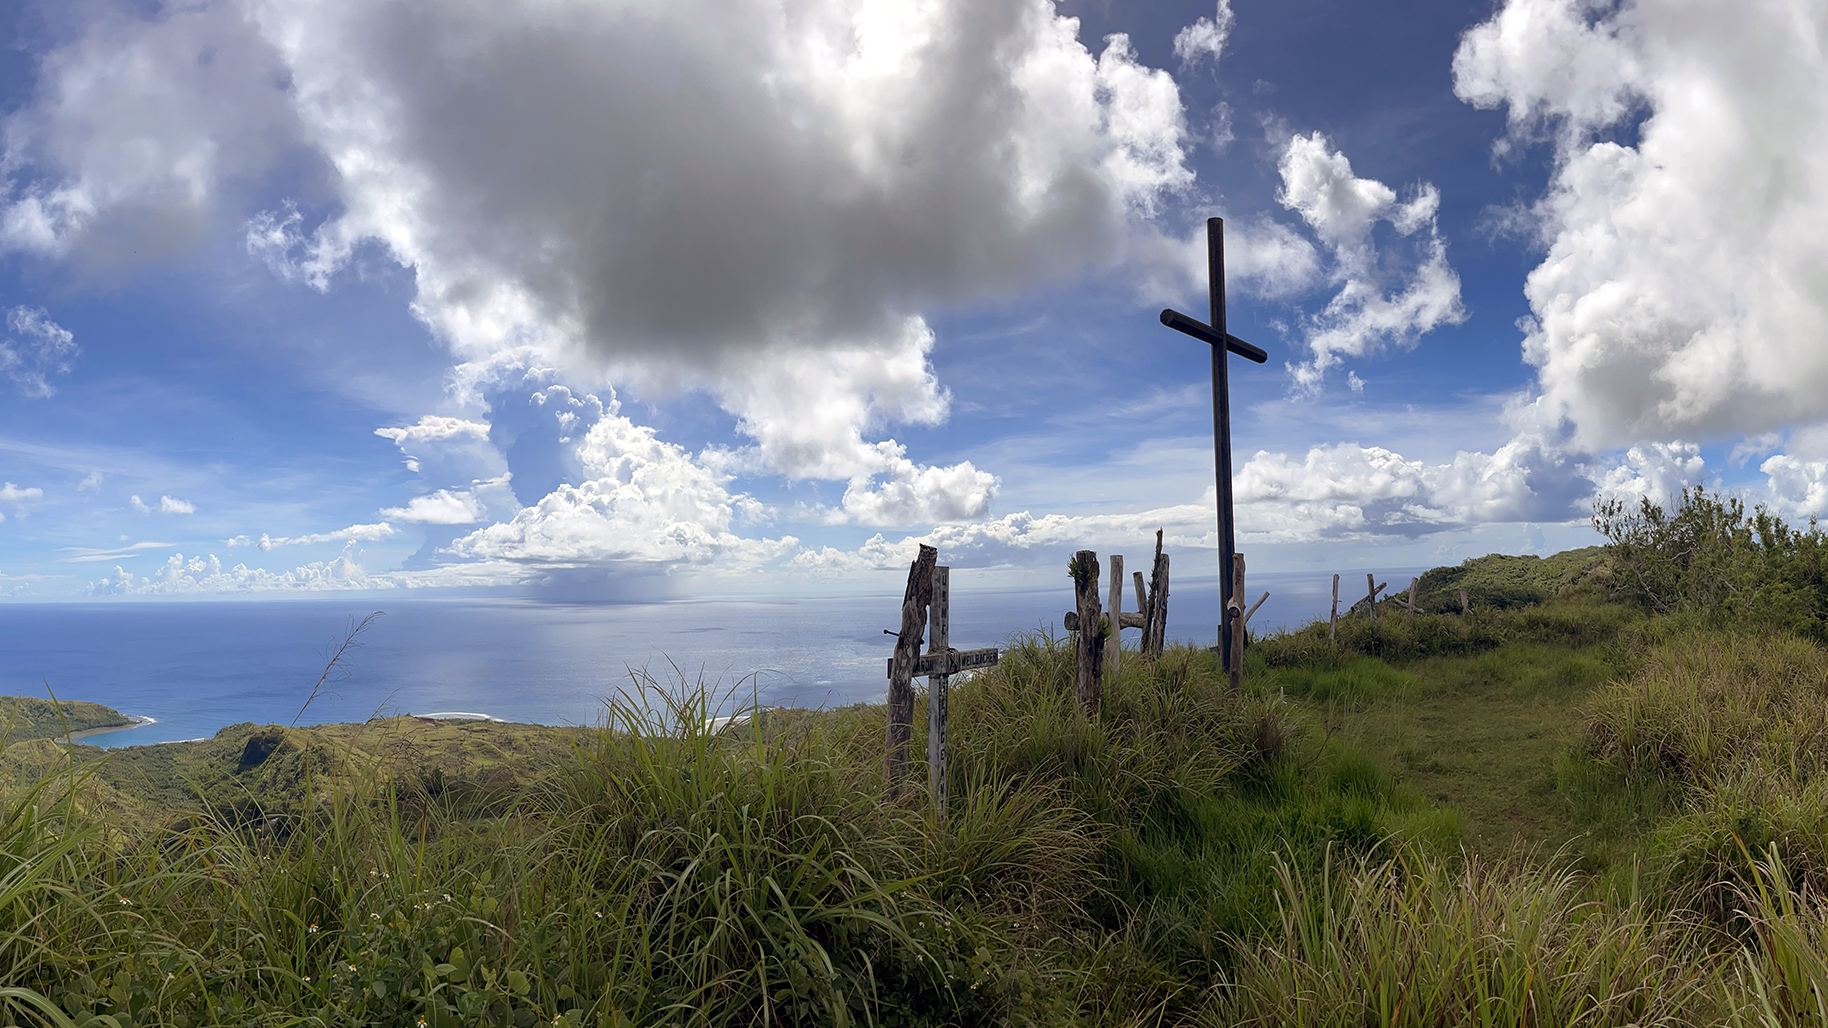 Wooden crosses serve as a memorial on the peak of Mount Lamlam near Agat, Guam (photograph by Russell Worth Parker).